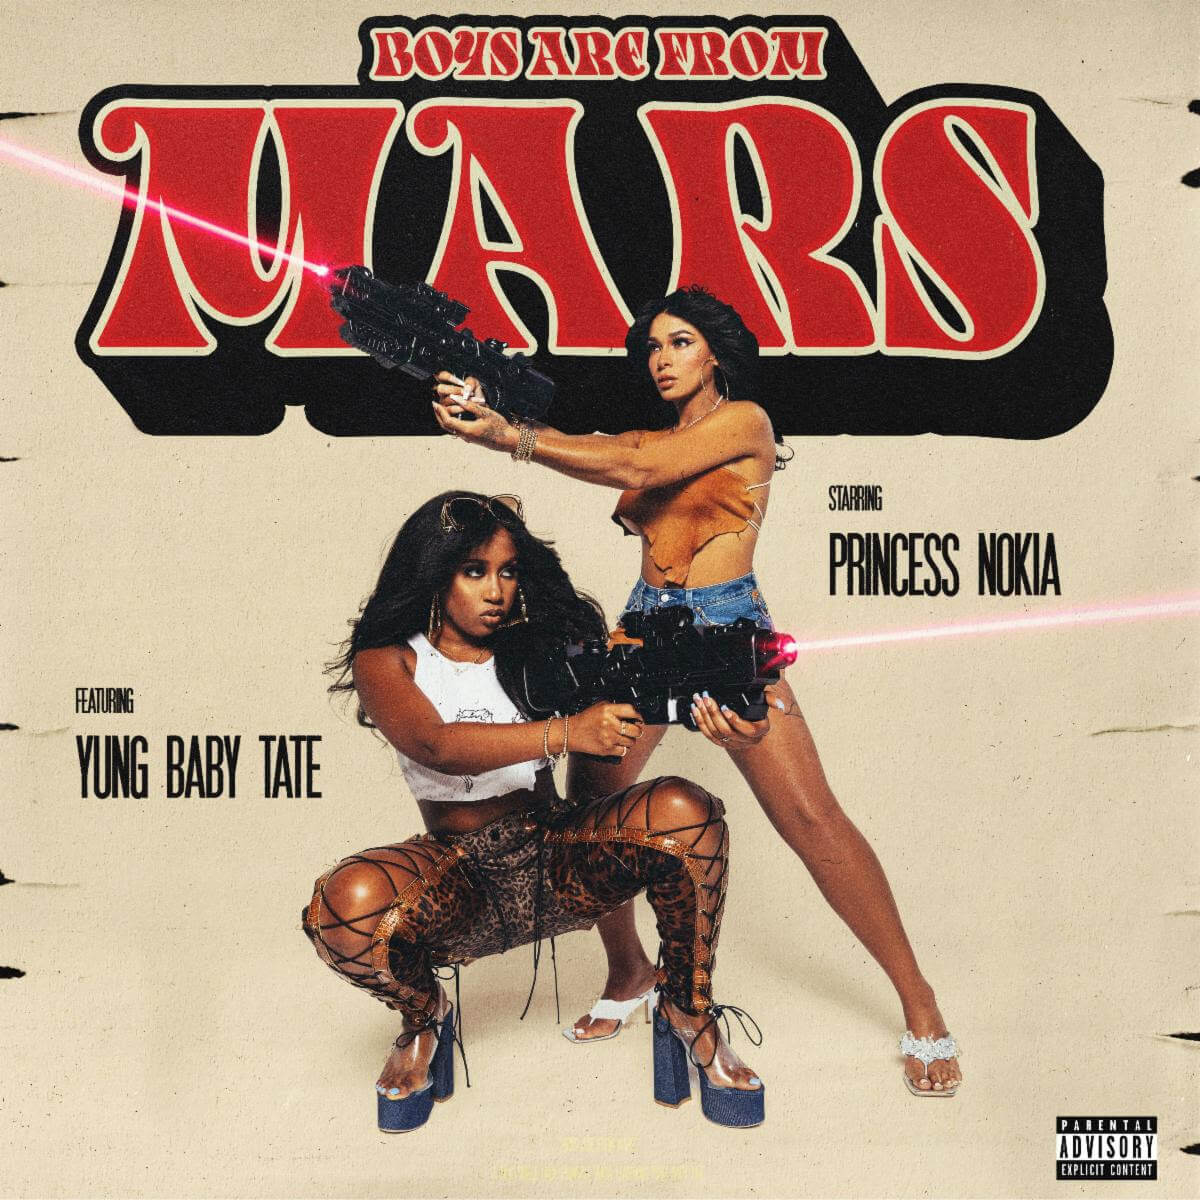 Princess Nokia has dropped her new single “Boys Are From Mars” featuring Yung Baby Tate. The single is her first, for Arista Records